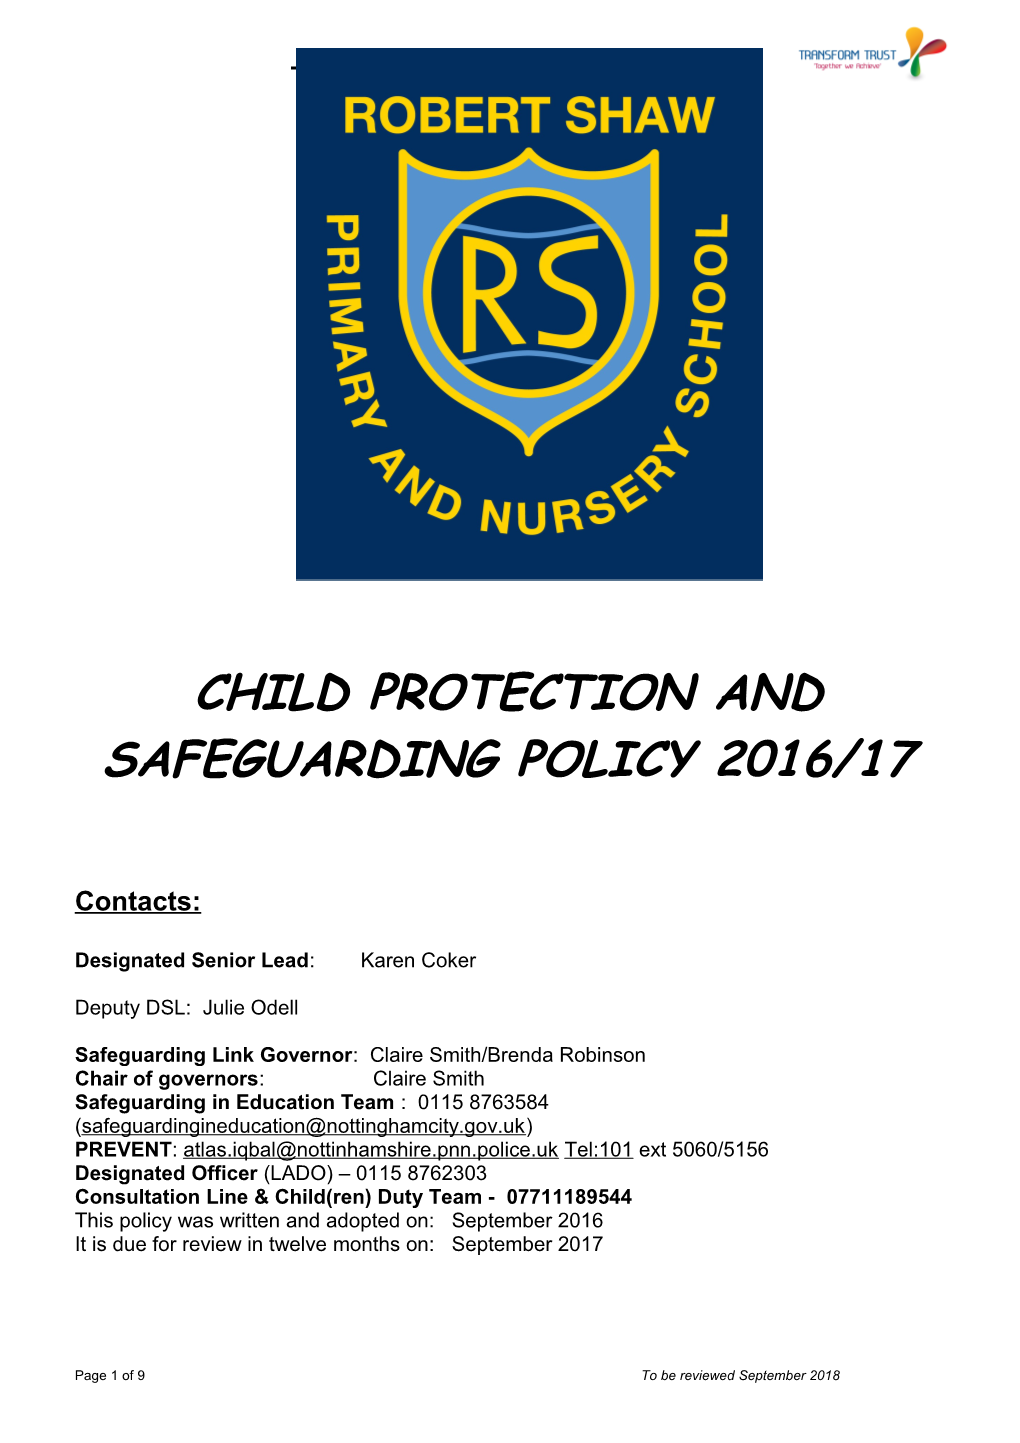 Child Protection Policy Framework for Nottingham Schools